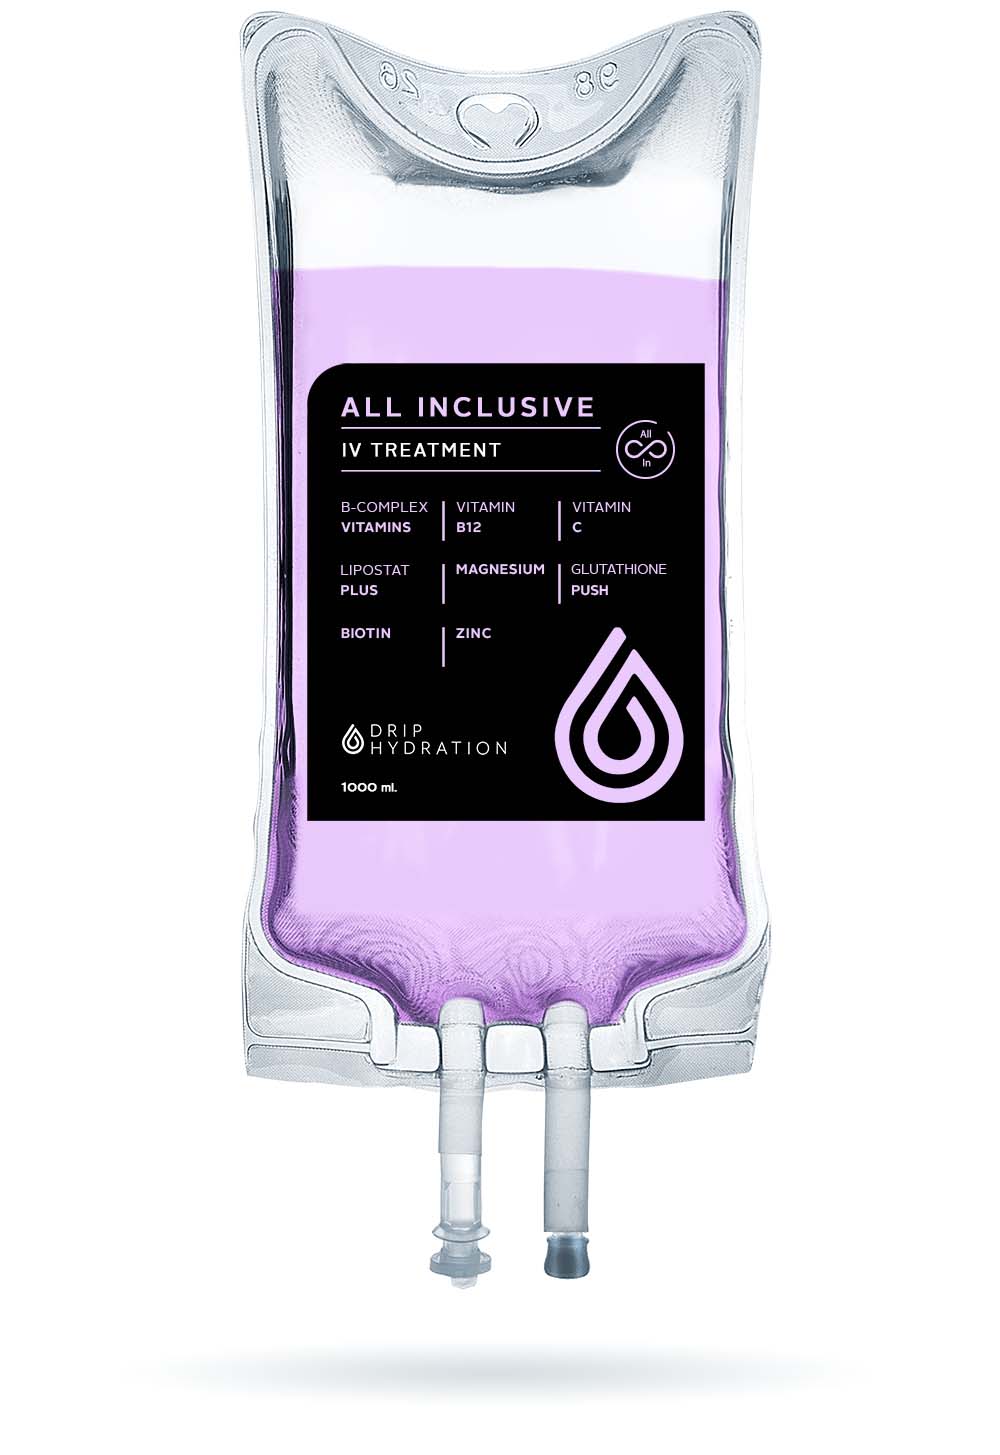 infusion bag named all inclusive iv linking toward the service page